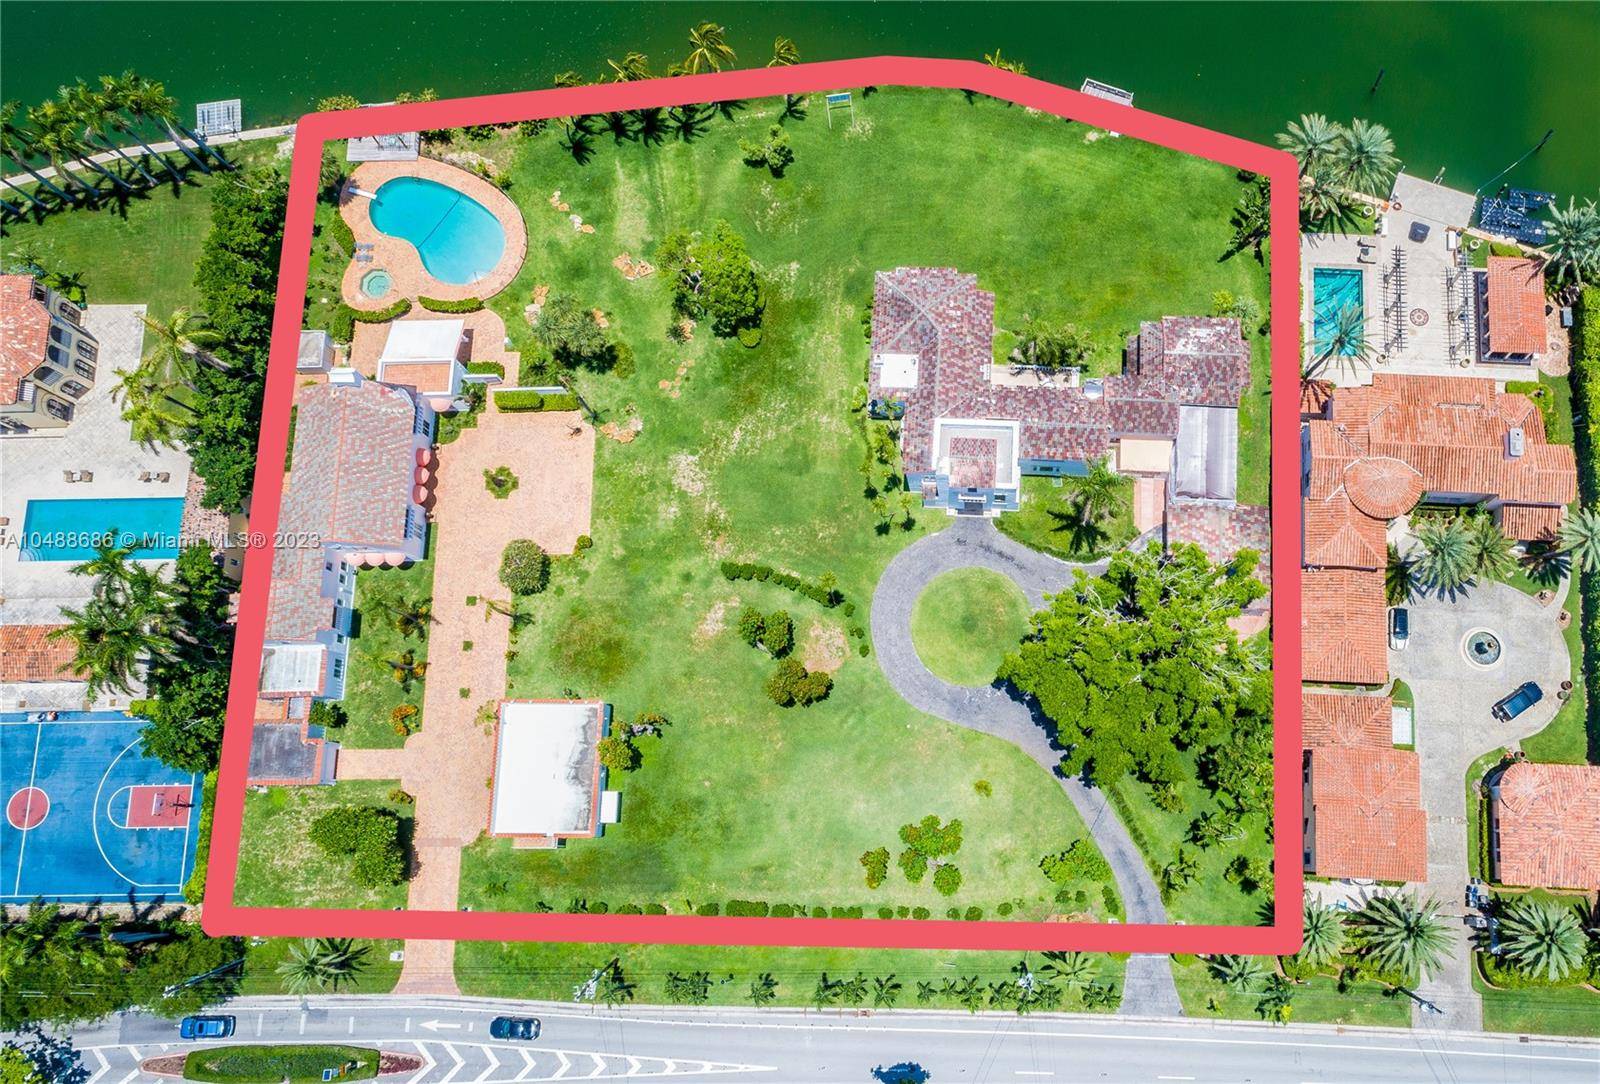 DEVELOPERS DREAM SUBDIVIDE THIS WATERFRONT 2 ACRE MIAMI BEACH LEGACY ESTATE INTO 2 OR OPTIMALLY 3 LOTS !